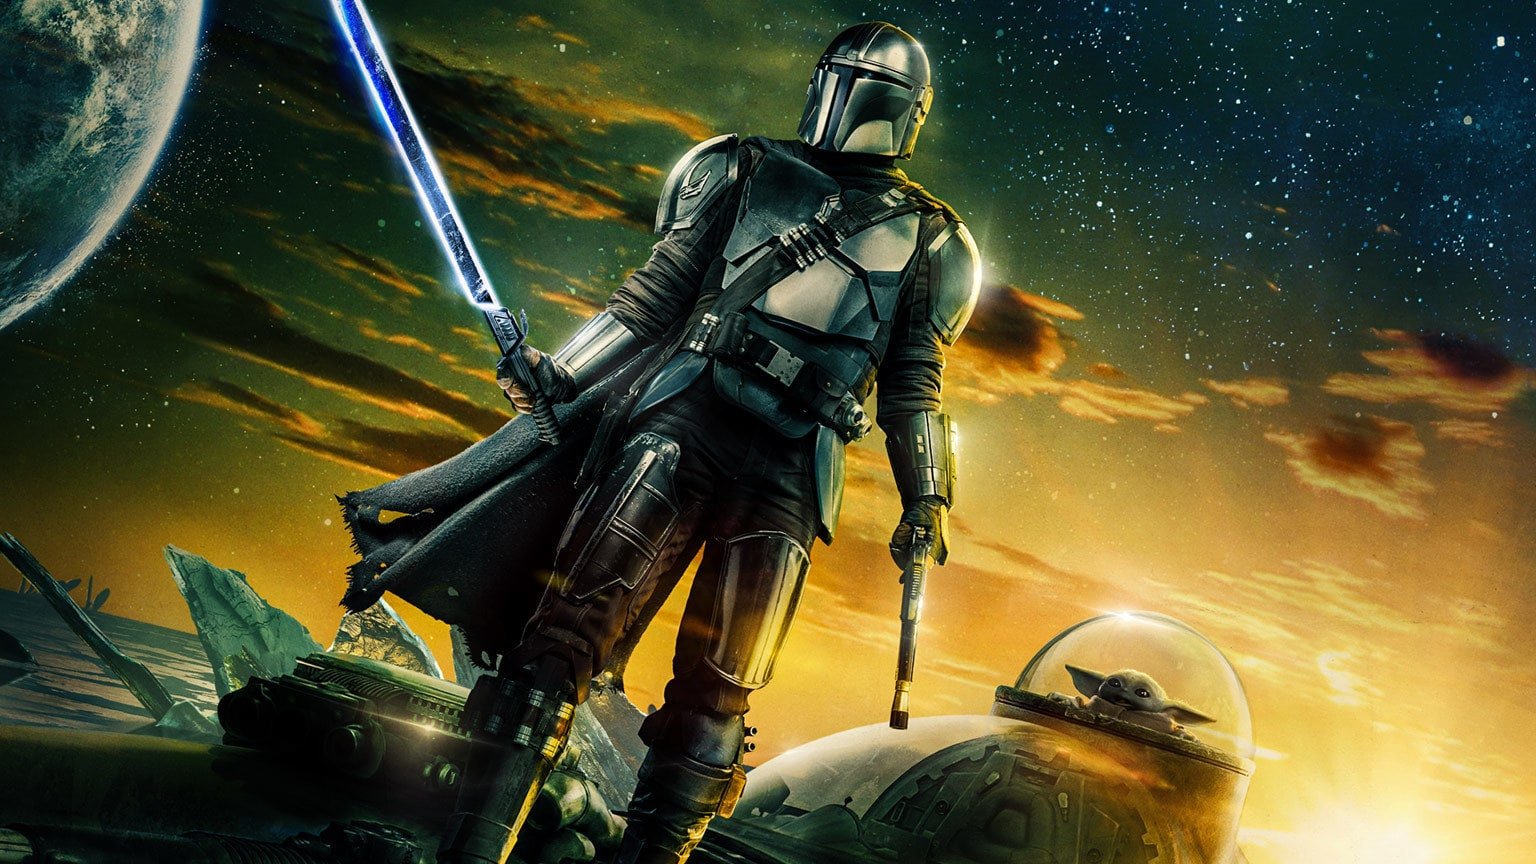 The Mandalorian – Star Wars Thoughts